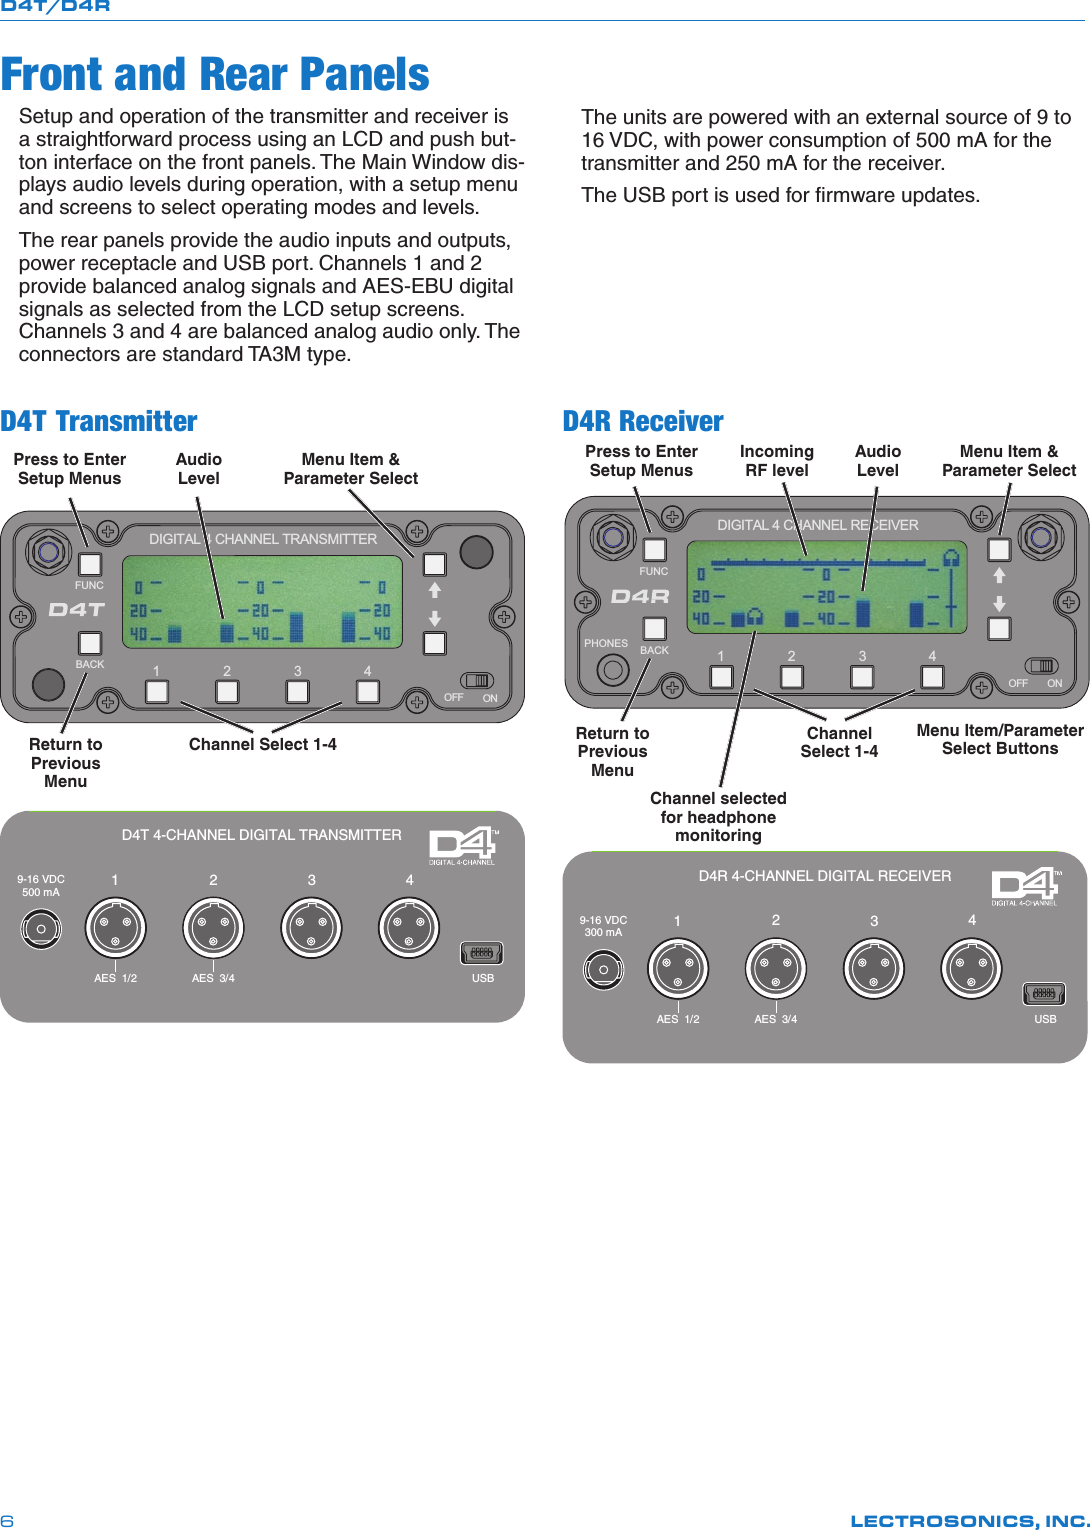 D4T/D4RLECTROSONICS, INC.6Front and Rear PanelsSetup and operation of the transmitter and receiver is a straightforward process using an LCD and push but-ton interface on the front panels. The Main Window dis-plays audio levels during operation, with a setup menu and screens to select operating modes and levels.The rear panels provide the audio inputs and outputs, powerreceptacleandUSBport.Channels1and2provide balanced analog signals and AES-EBU digital signals as selected from the LCD setup screens. Channels 3 and 4 are balanced analog audio only. The connectors are standard TA3M type.D4T TransmitterFUNCBACKOFF ON1234DIGITAL 4 CHANNEL TRANSMITTERChannel Select 1-4Menu Item &amp; Parameter SelectReturn to Previous MenuPress to Enter Setup MenusAudio LevelUSBAES  3/412349-16 VDC500 mAAES  1/2D4T 4-CHANNEL DIGITAL TRANSMITTERThe units are powered with an external source of 9 to 16VDC,withpowerconsumptionof500mAforthetransmitter and 250 mA for the receiver.The USB port is used for ﬁrmware updates.D4R ReceiverFUNCBACKOFF ON1234PHONESDIGITAL 4 CHANNEL RECEIVERChannel Select 1-4Menu Item/Parameter Select ButtonsPress to Enter Setup MenusReturn to Previous MenuChannel selected for headphone monitoringIncoming RF levelMenu Item &amp; Parameter SelectAudio LevelUSBAES  3/412349-16 VDC300 mAAES  1/2D4R 4-CHANNEL DIGITAL RECEIVER